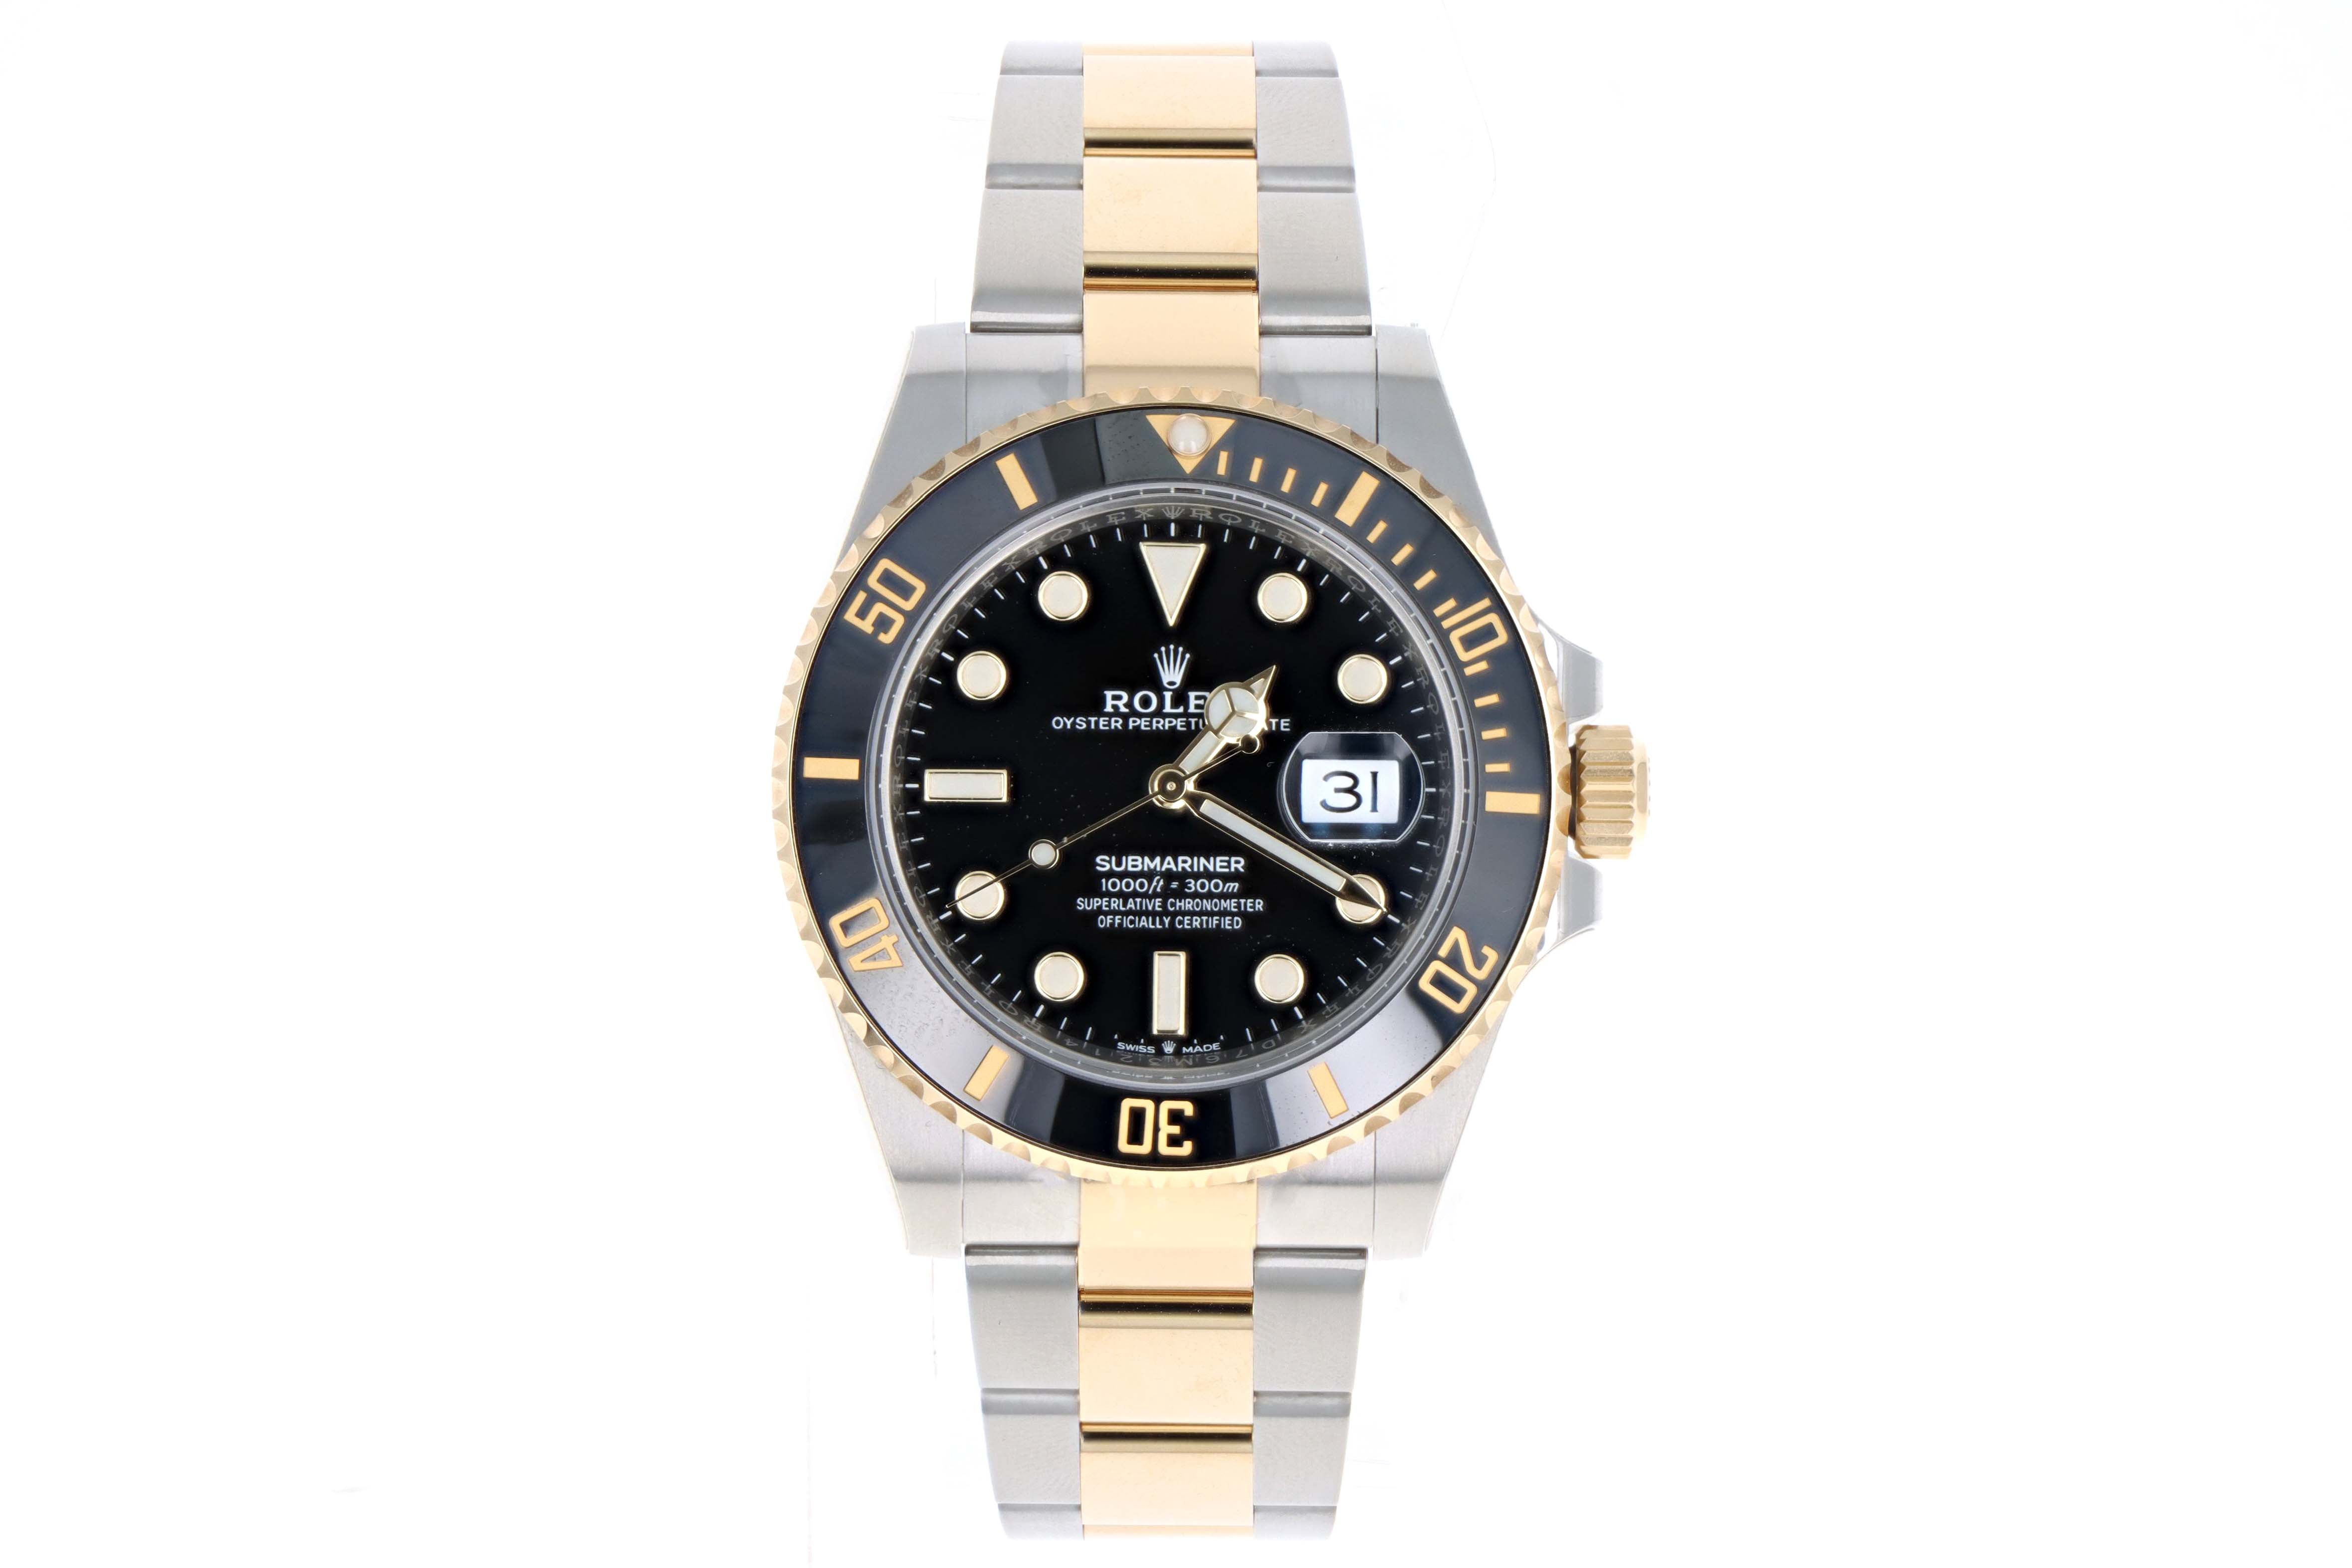 New Rolex Submariner Model 126613 Two Tone Black Dial and Bezel